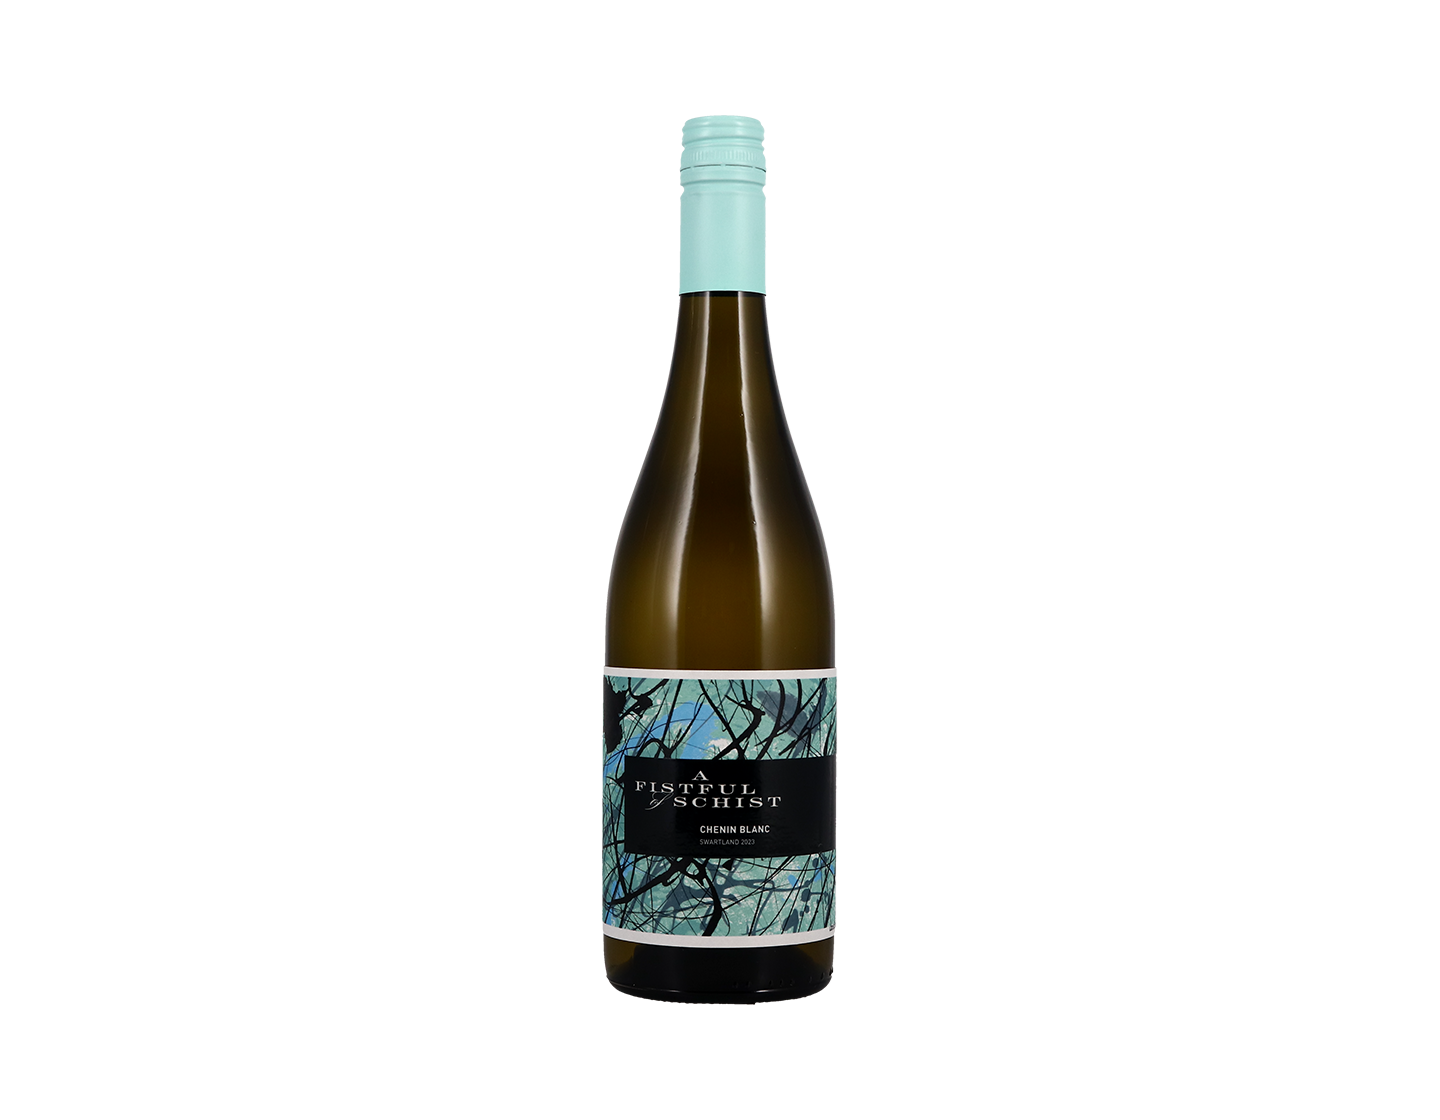 Pre-order A Fistful of Schist Chenin Blanc Swartland (South African white wine)